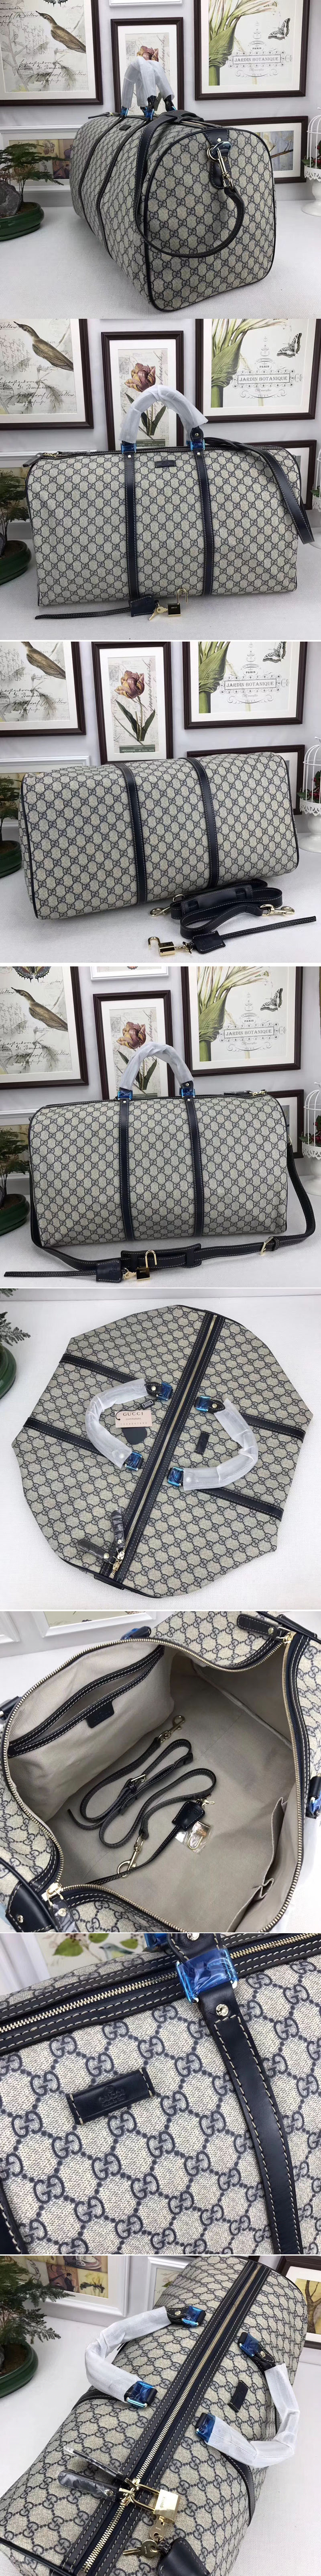 Replica Gucci 206500 GG Fabric Large Carry On Duffel Bags Blue